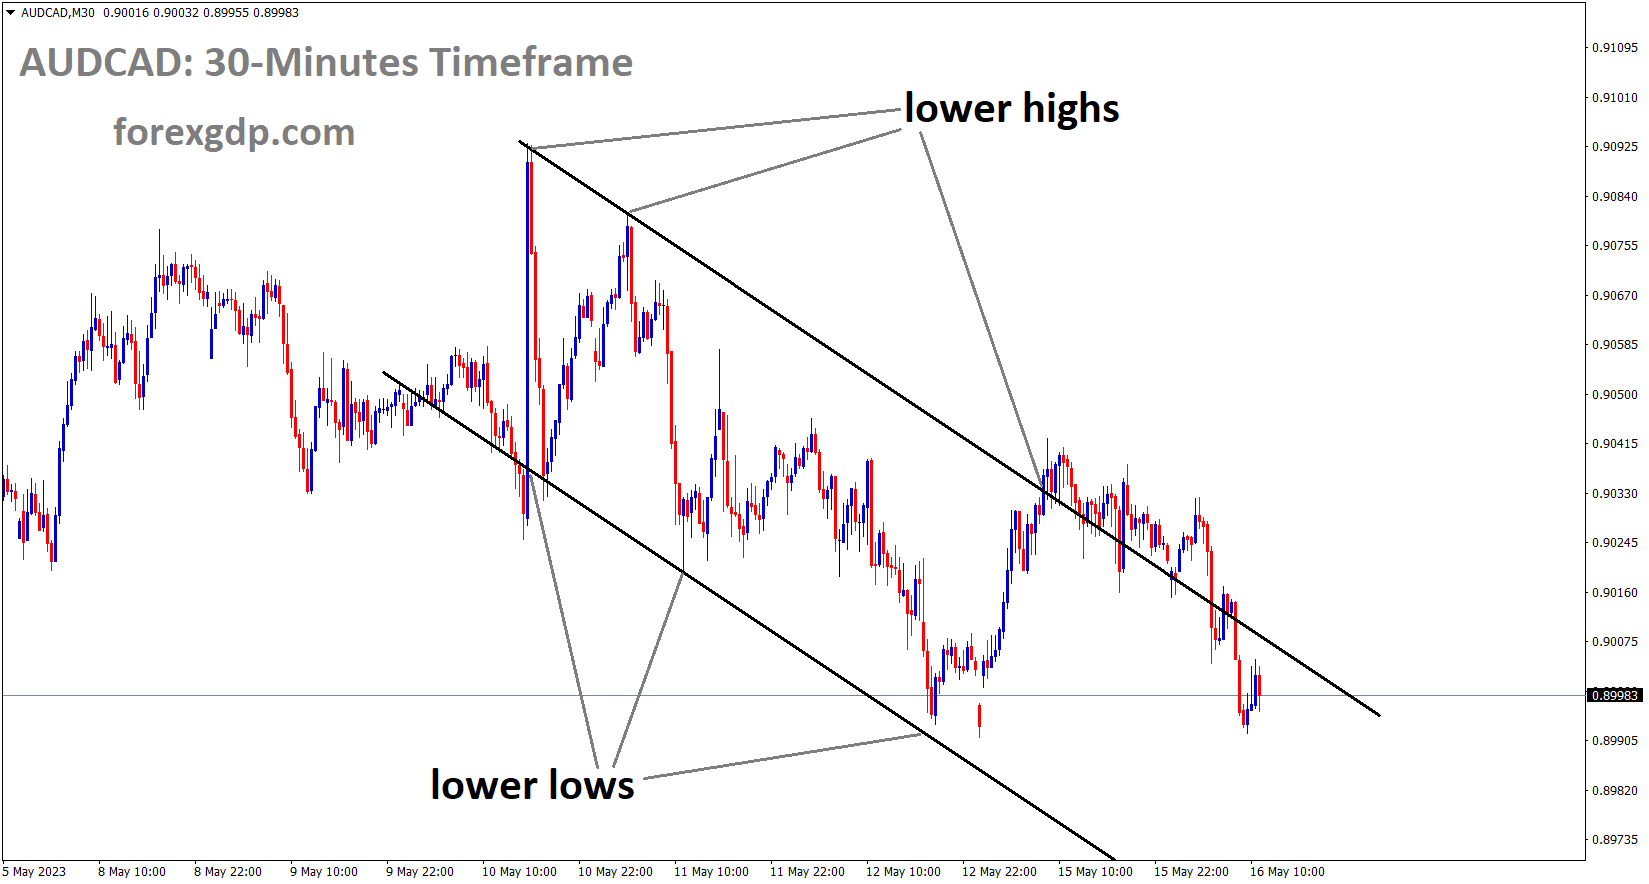 AUDCAD is moving in the descending channel and the market has fallen from the lower high area of the channel